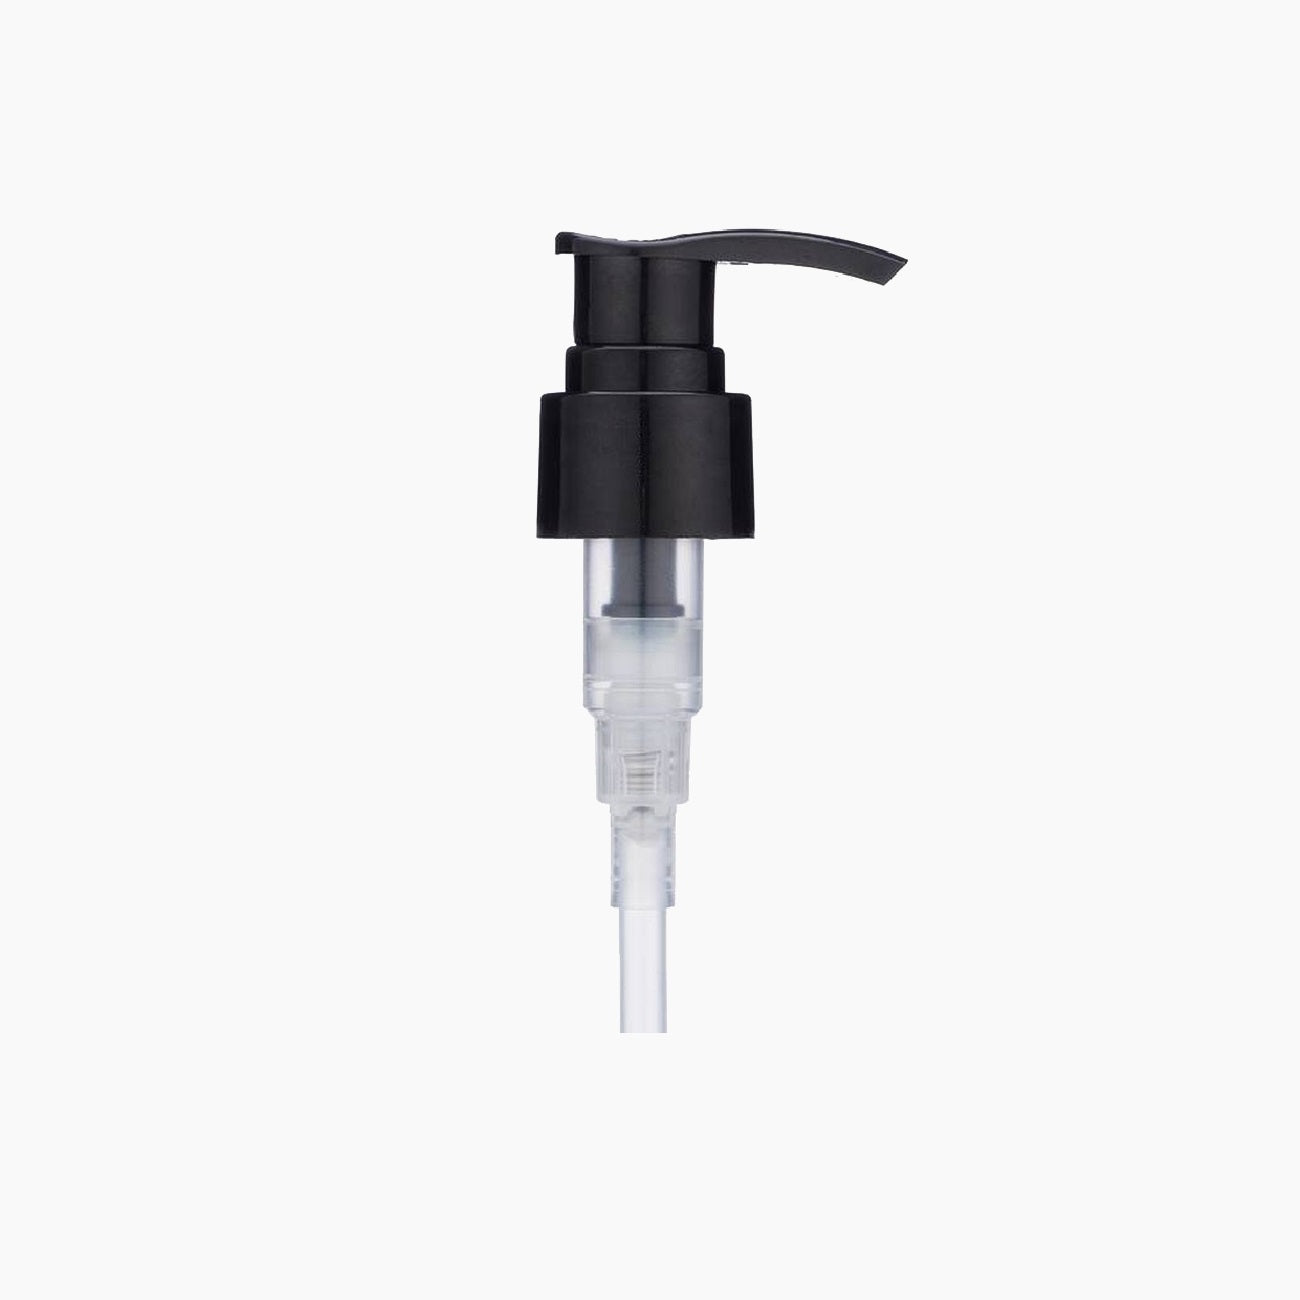 24mm Black Plastic Lotion Pump Cap On White Background | Brightpack Closures And Accessories